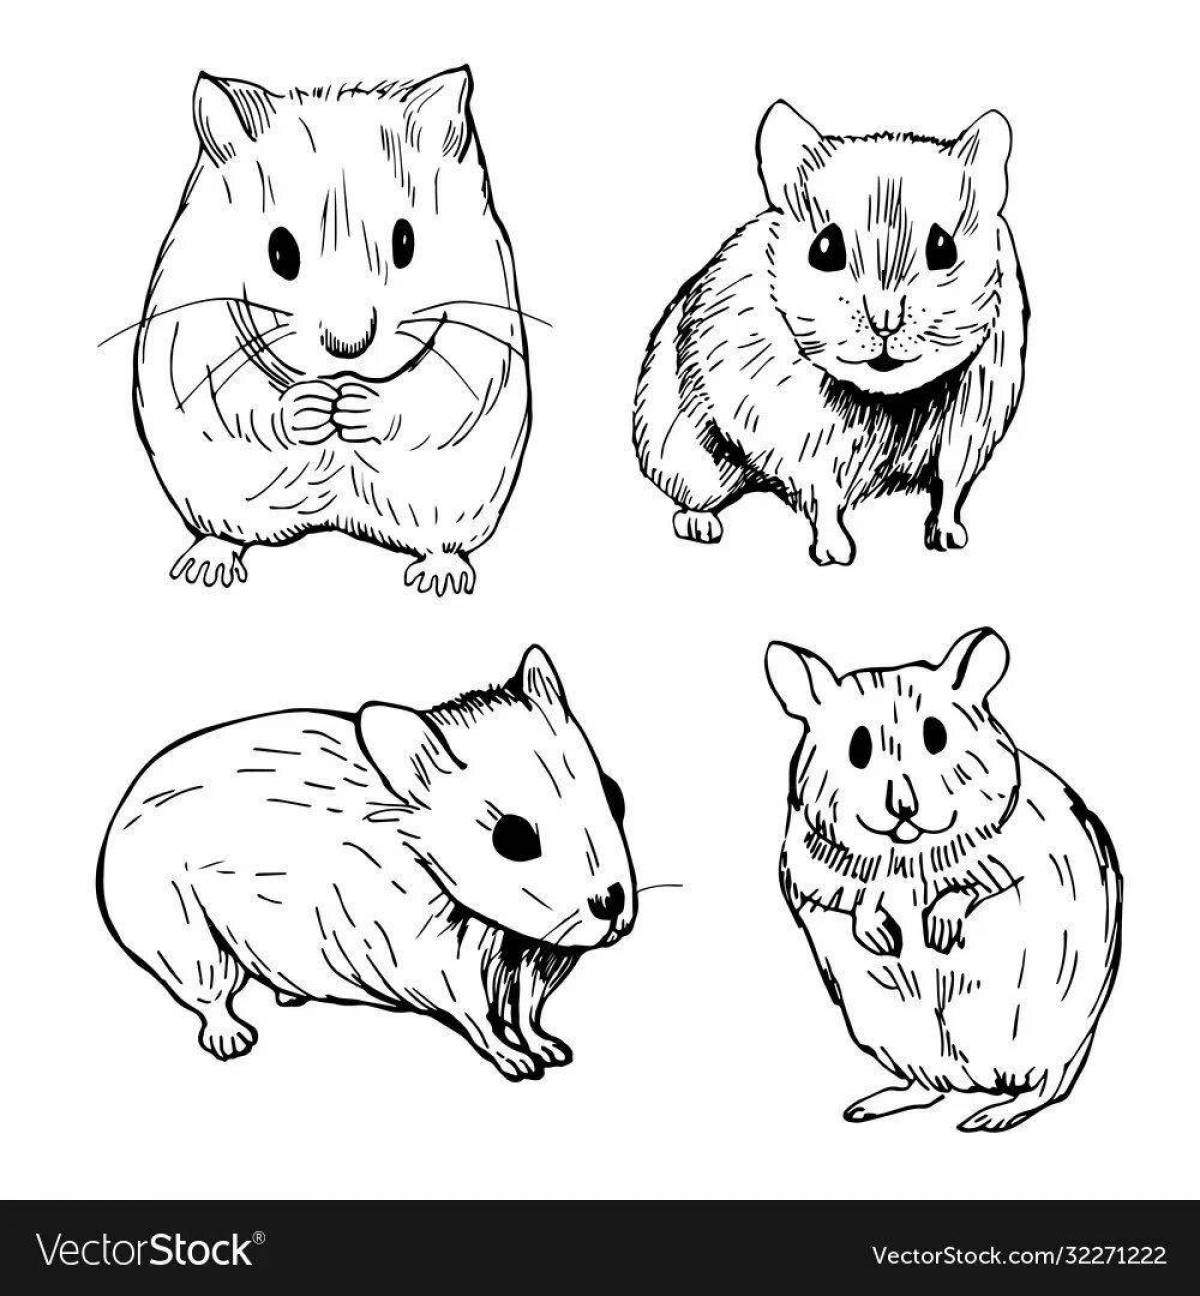 A funny coloring Djungarian hamster